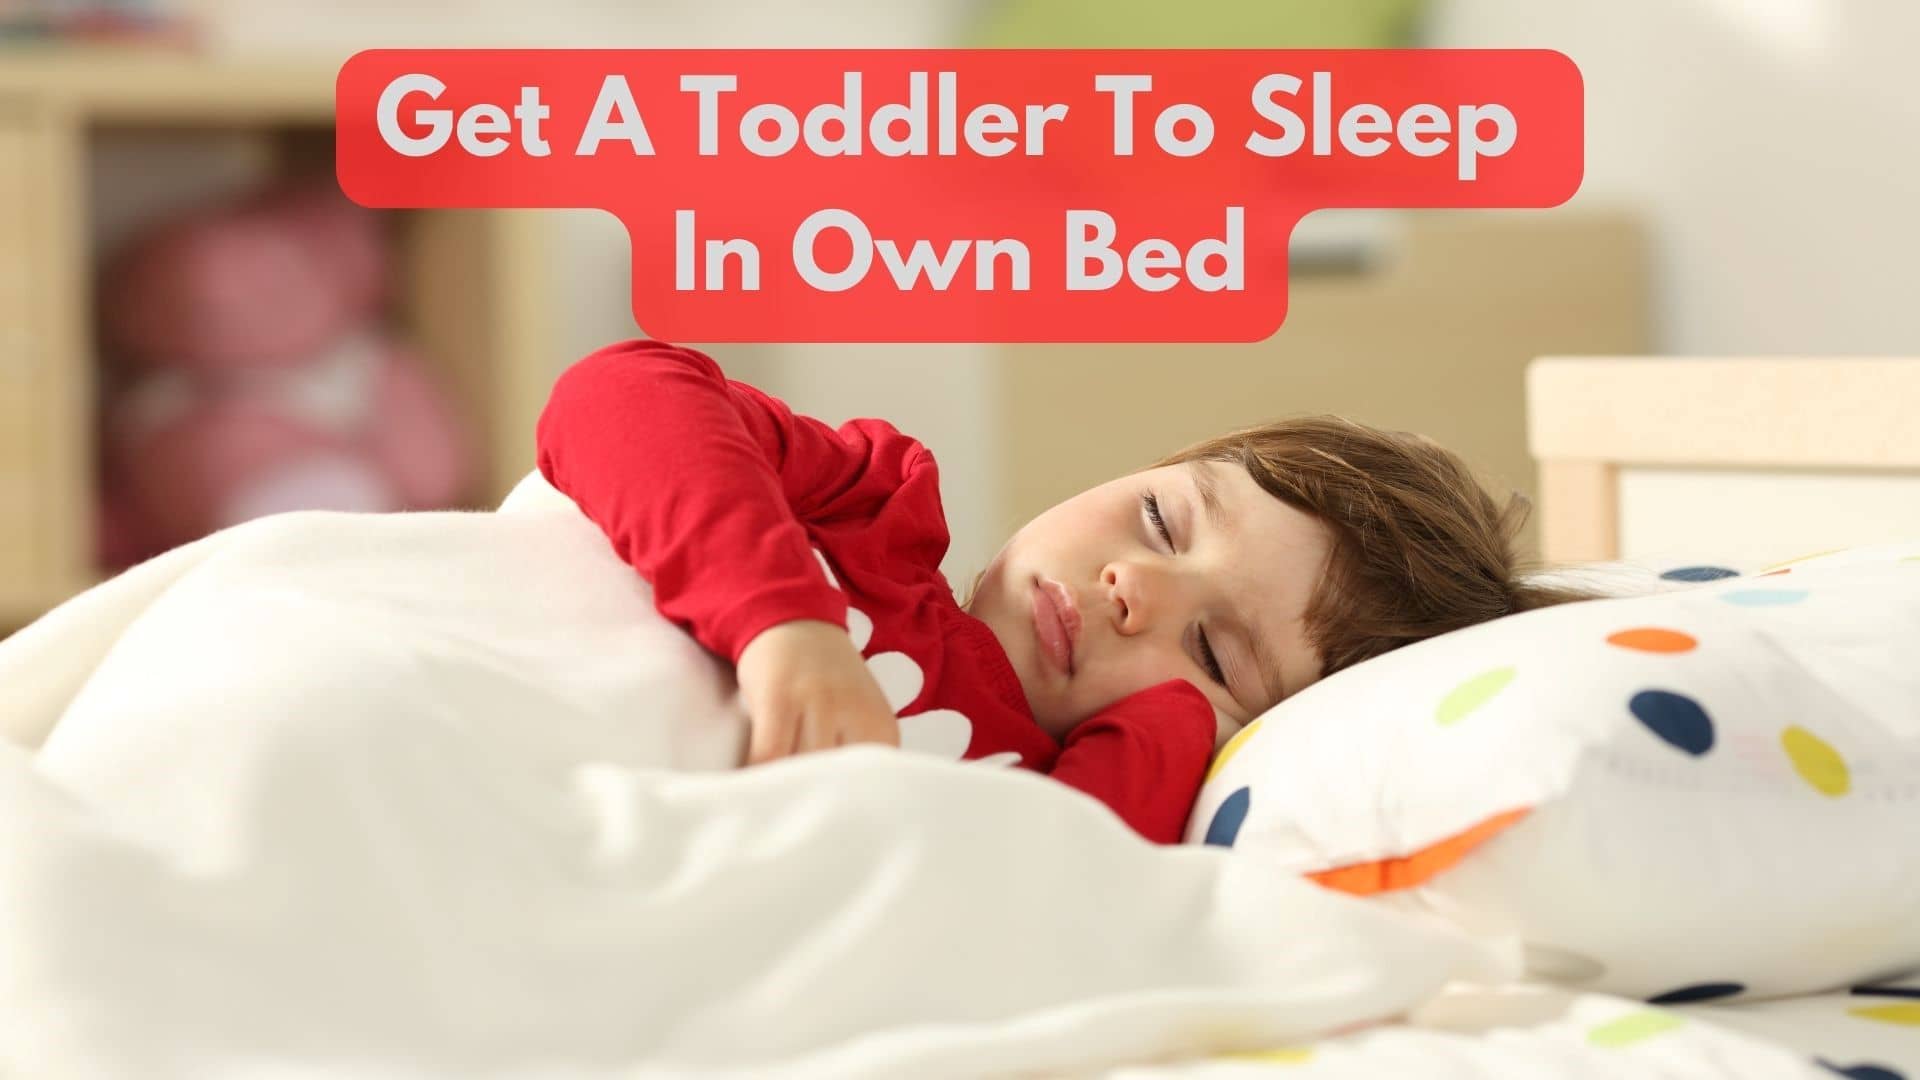 How To Get A Toddler To Sleep In Own Bed